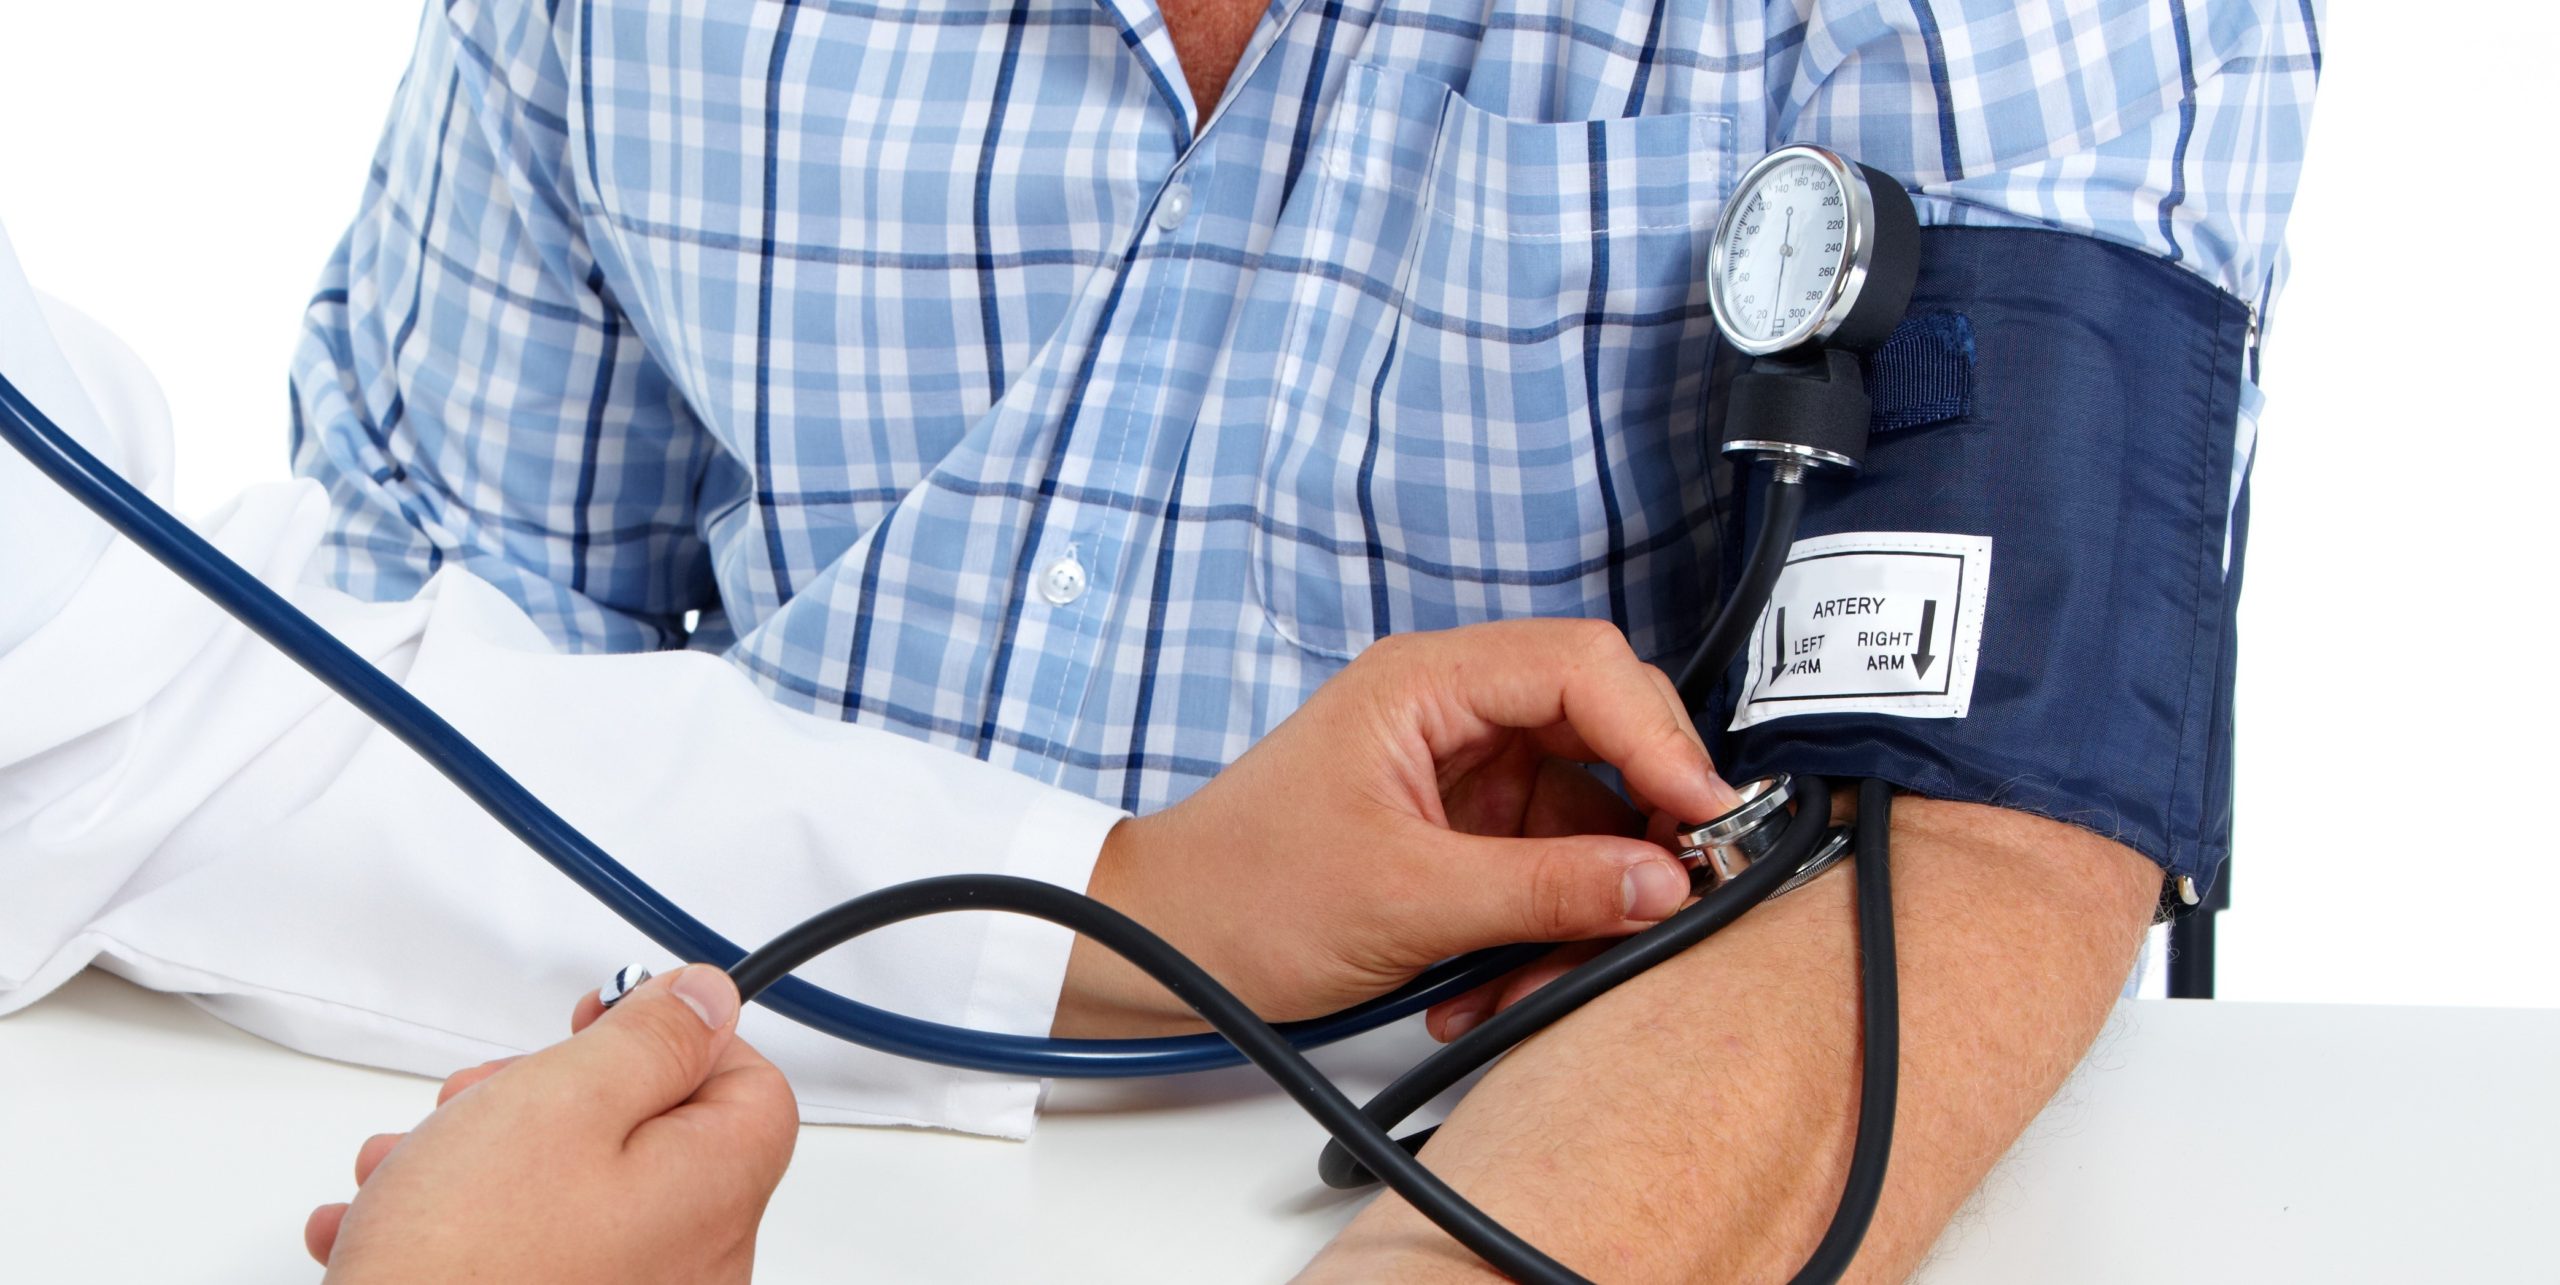 A man is taking his blood pressure with a stethoscope.